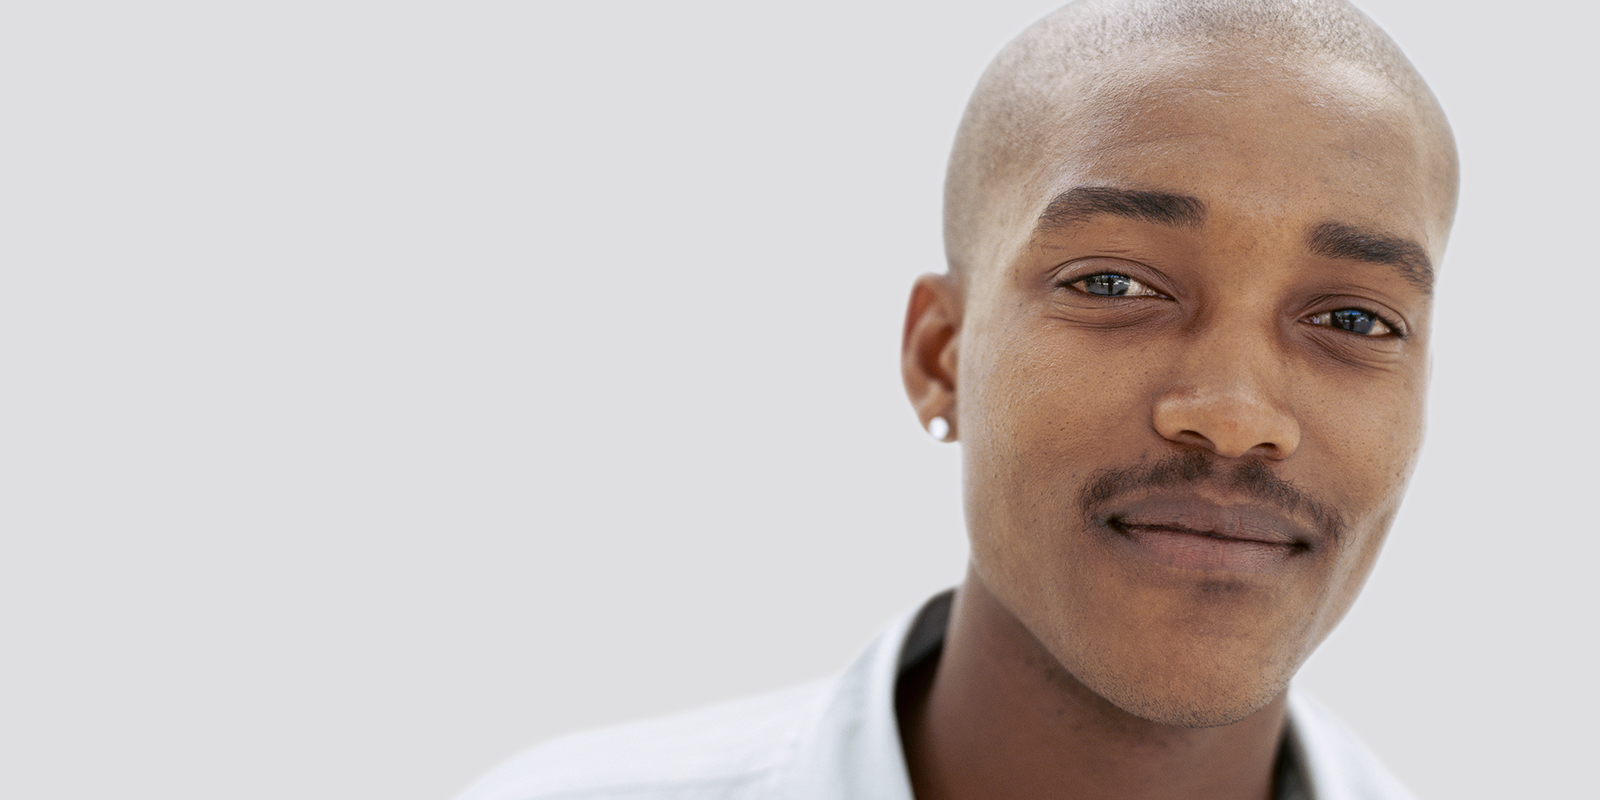 How to grow, trim & shape a moustache: Step wise guide | Braun UK